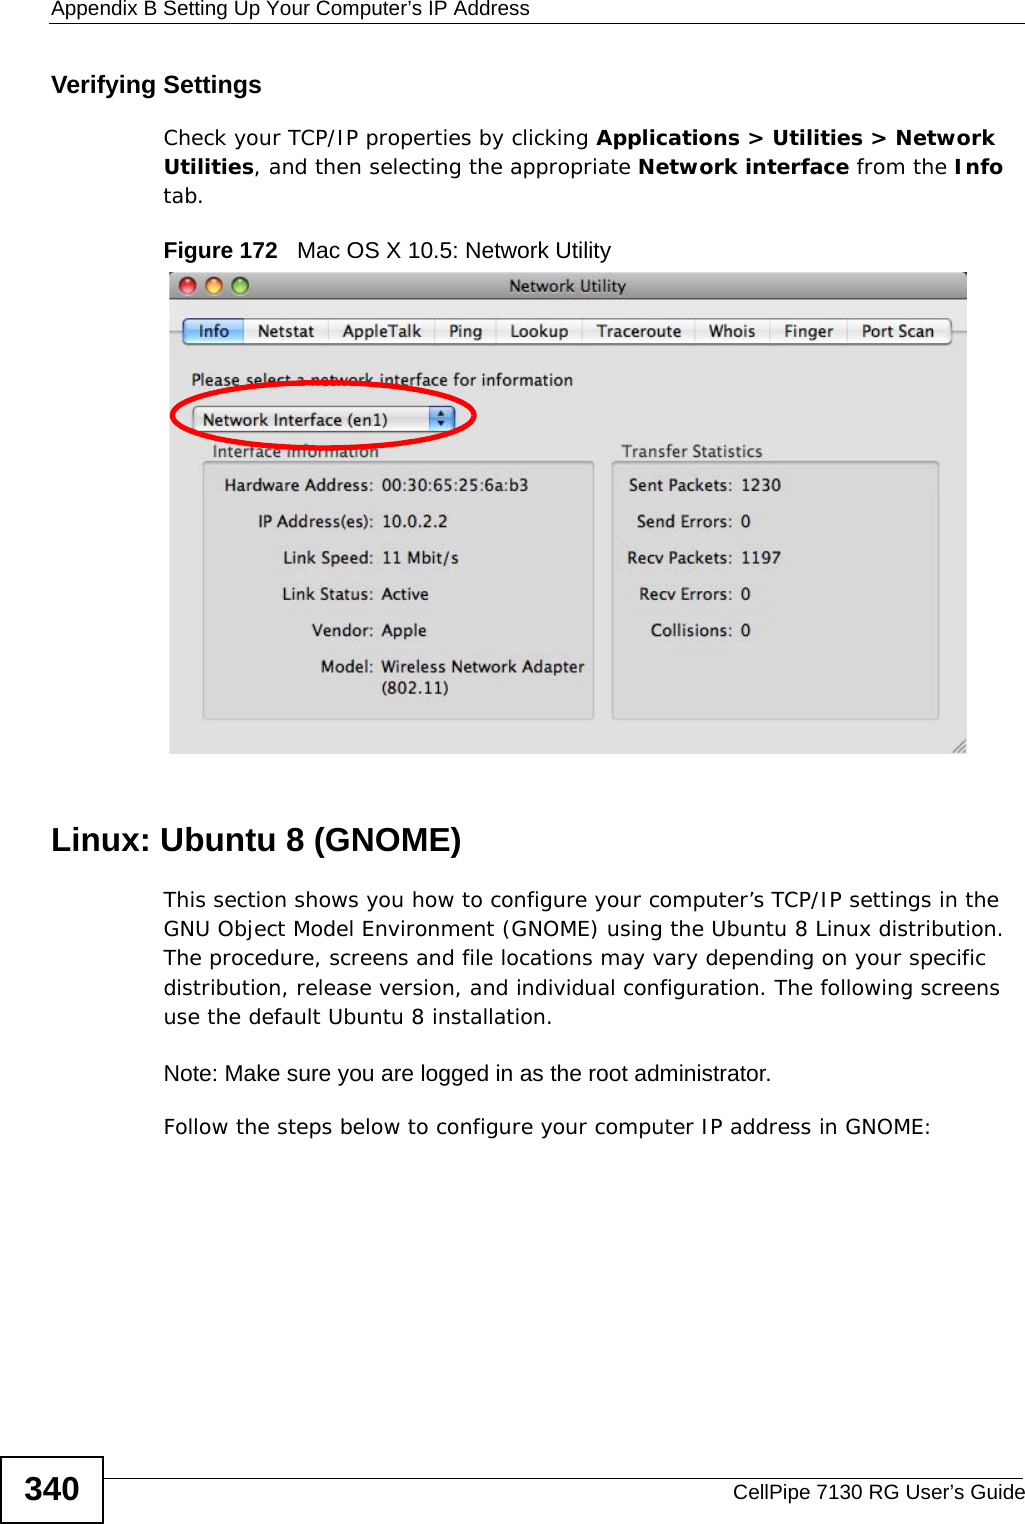 Appendix B Setting Up Your Computer’s IP AddressCellPipe 7130 RG User’s Guide340Verifying SettingsCheck your TCP/IP properties by clicking Applications &gt; Utilities &gt; Network Utilities, and then selecting the appropriate Network interface from the Info tab.Figure 172   Mac OS X 10.5: Network UtilityLinux: Ubuntu 8 (GNOME)This section shows you how to configure your computer’s TCP/IP settings in the GNU Object Model Environment (GNOME) using the Ubuntu 8 Linux distribution. The procedure, screens and file locations may vary depending on your specific distribution, release version, and individual configuration. The following screens use the default Ubuntu 8 installation.Note: Make sure you are logged in as the root administrator. Follow the steps below to configure your computer IP address in GNOME: 